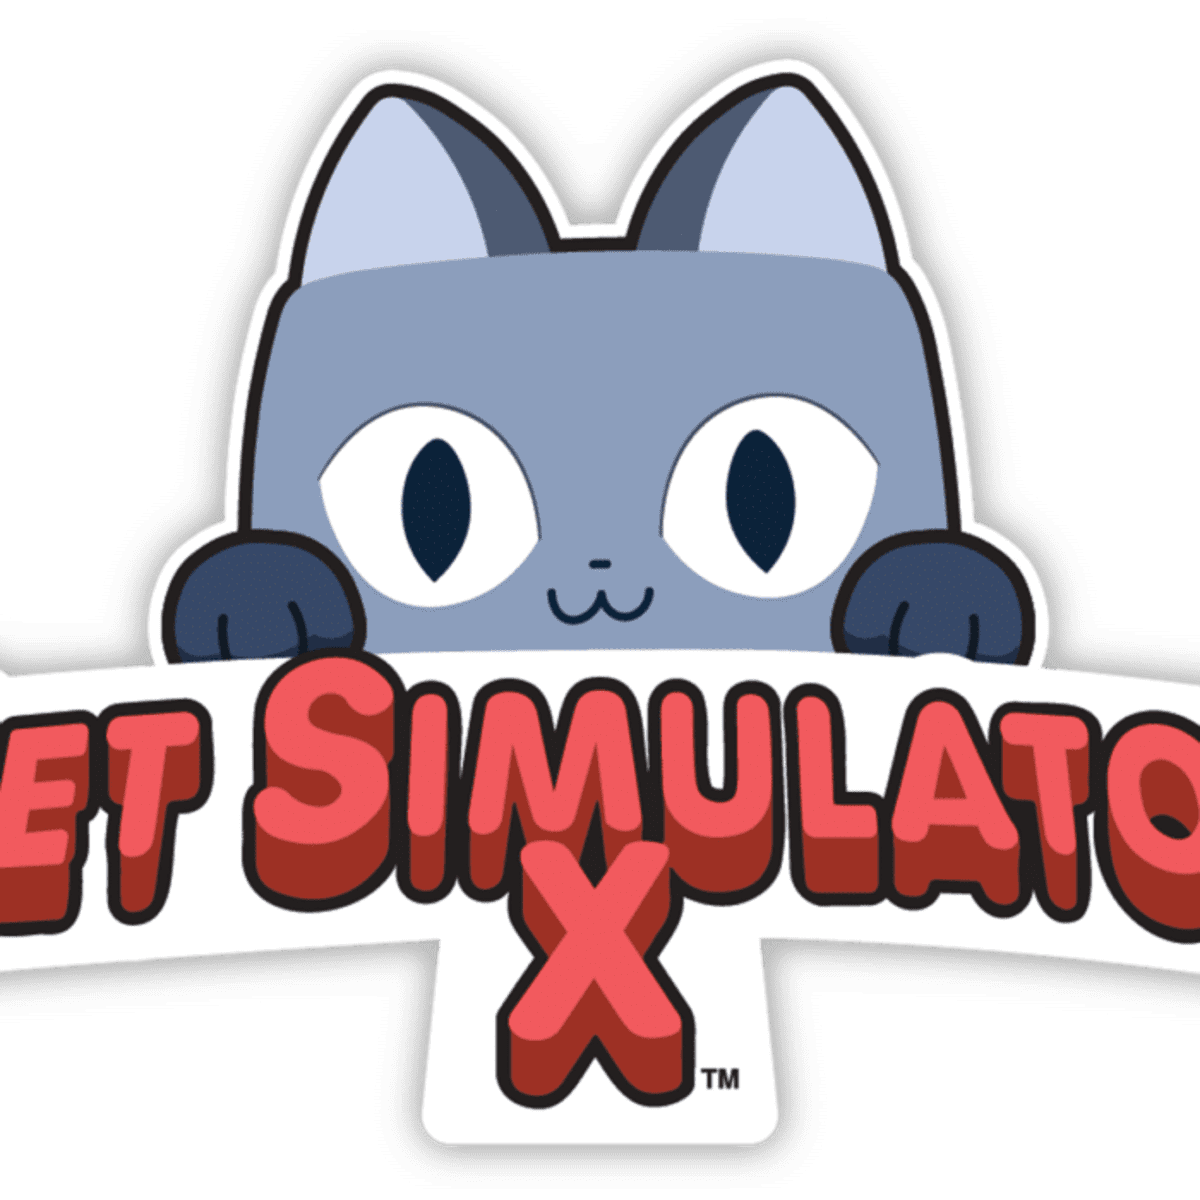 Pet Simulator X: A Brief History - HubPages